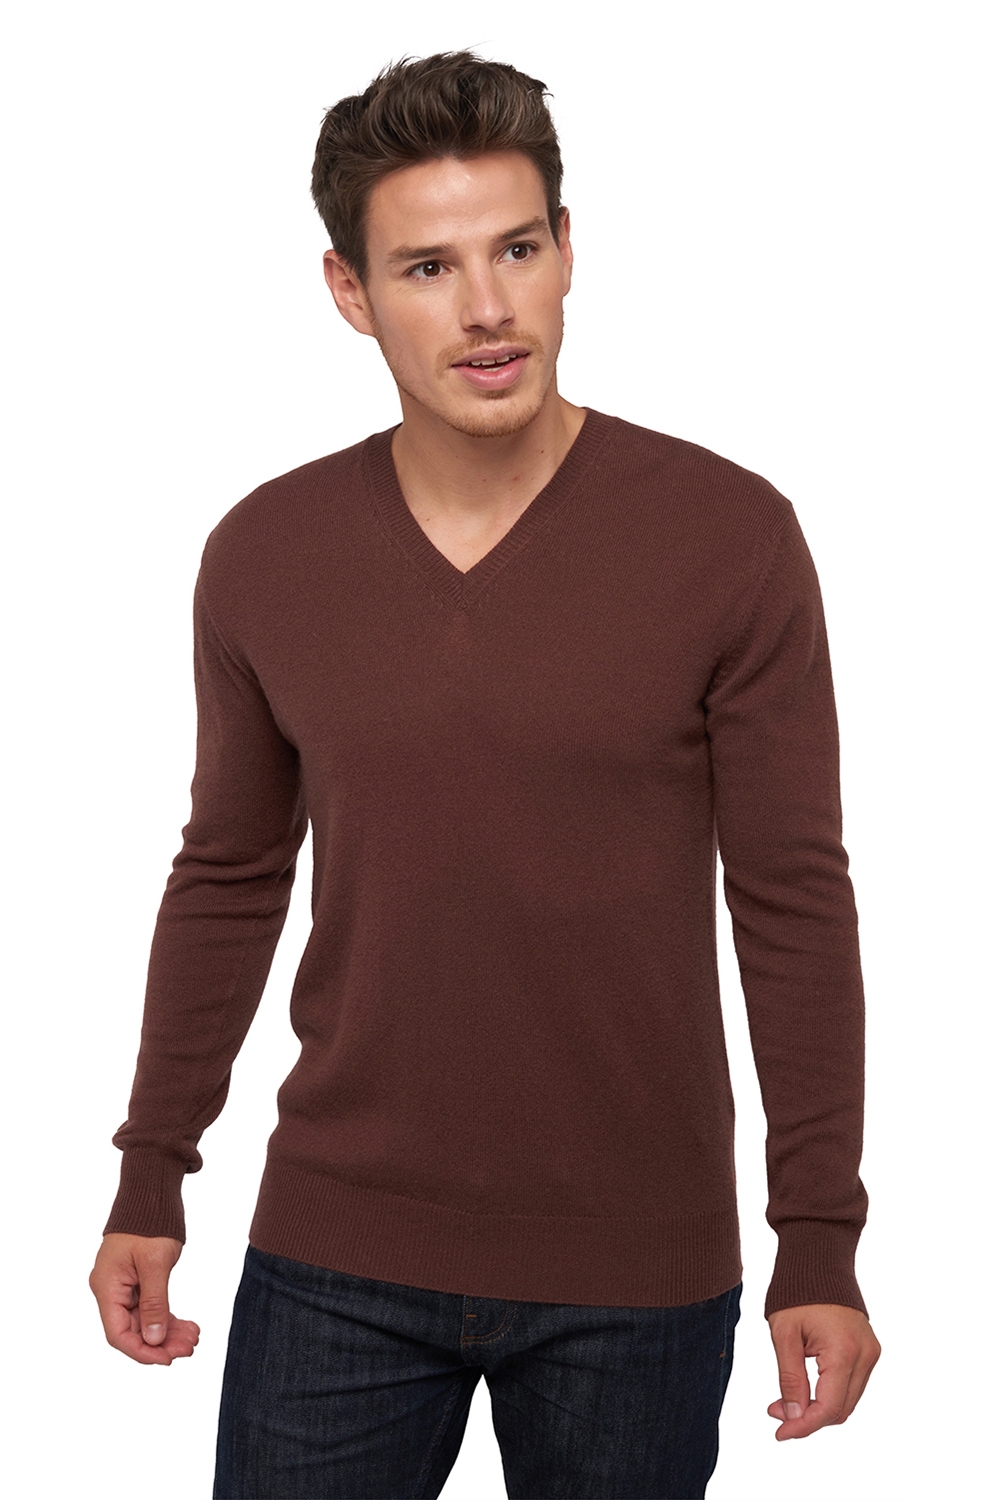 Cashmere men basic sweaters at low prices tor first chocobrown m